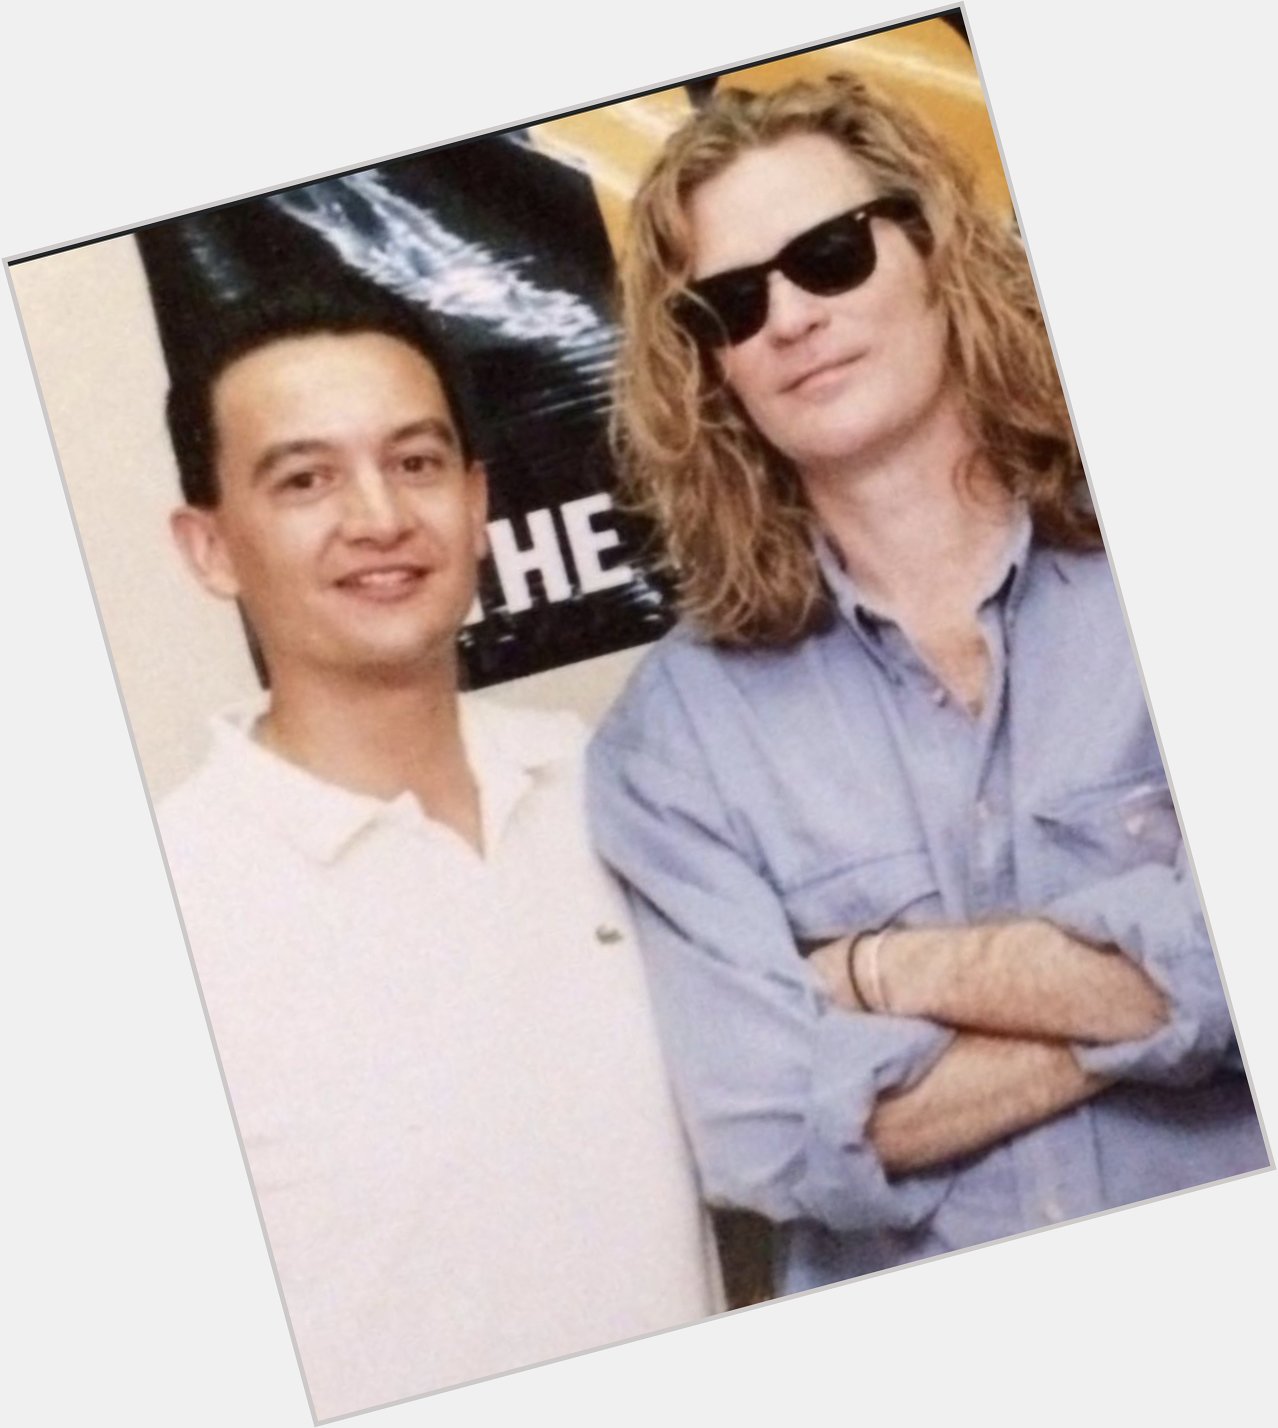 Happy 75th birthday to Daryl Hall! This photo was taken in Phoenix, Arizona back in 1991 (30 years ago yikes!). 